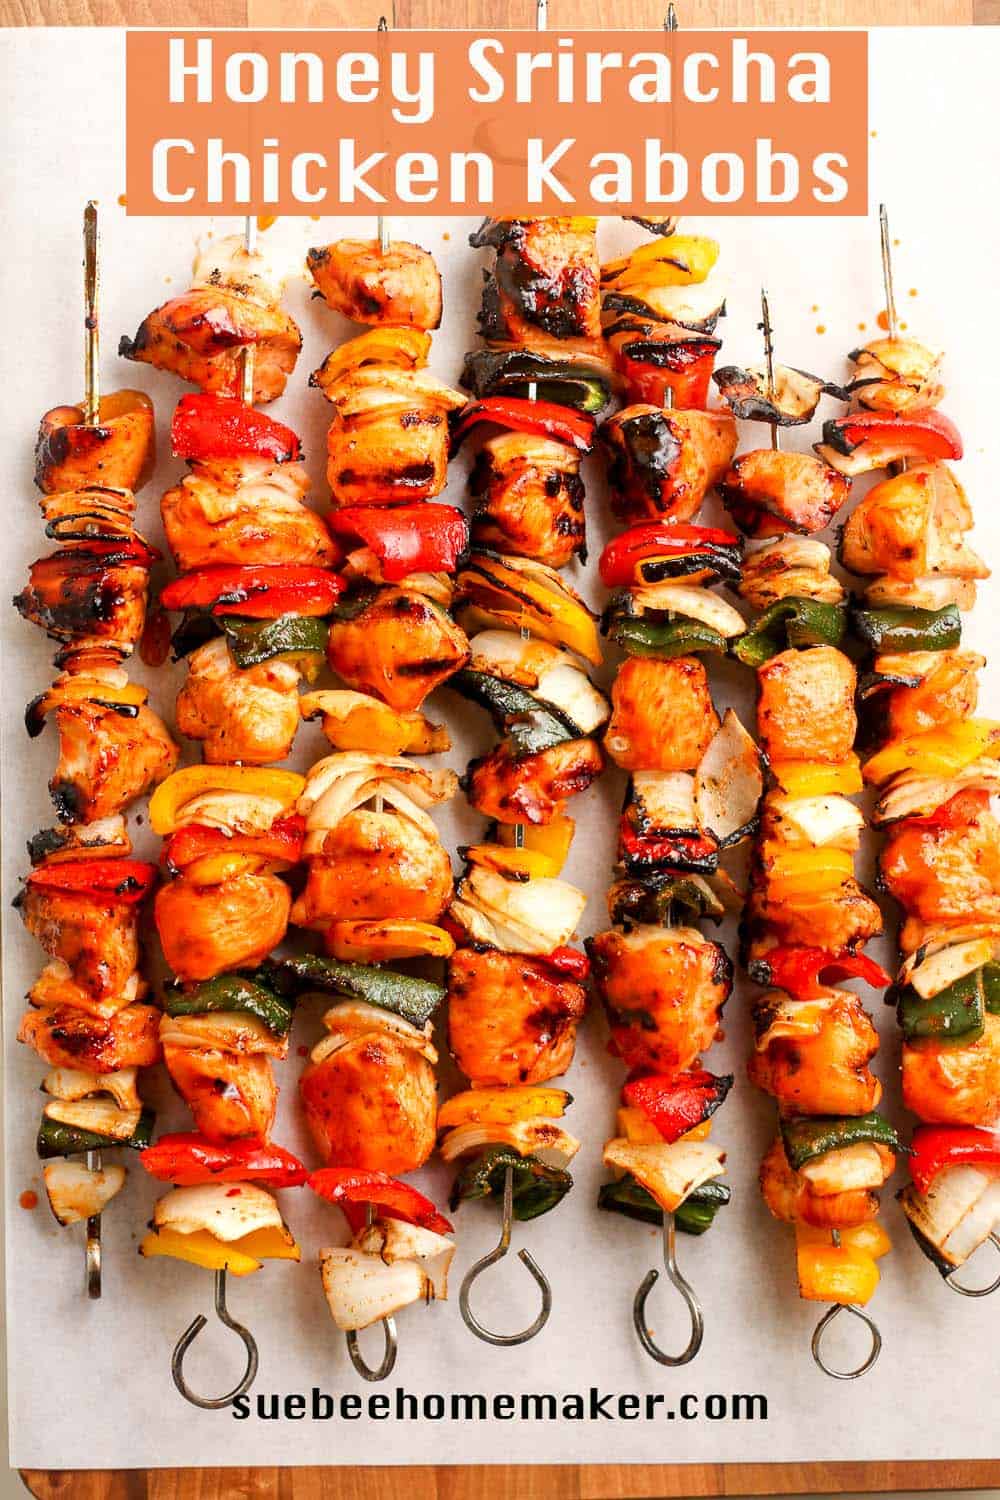 A cutting board of the kabobs after grilling, on the skewers.